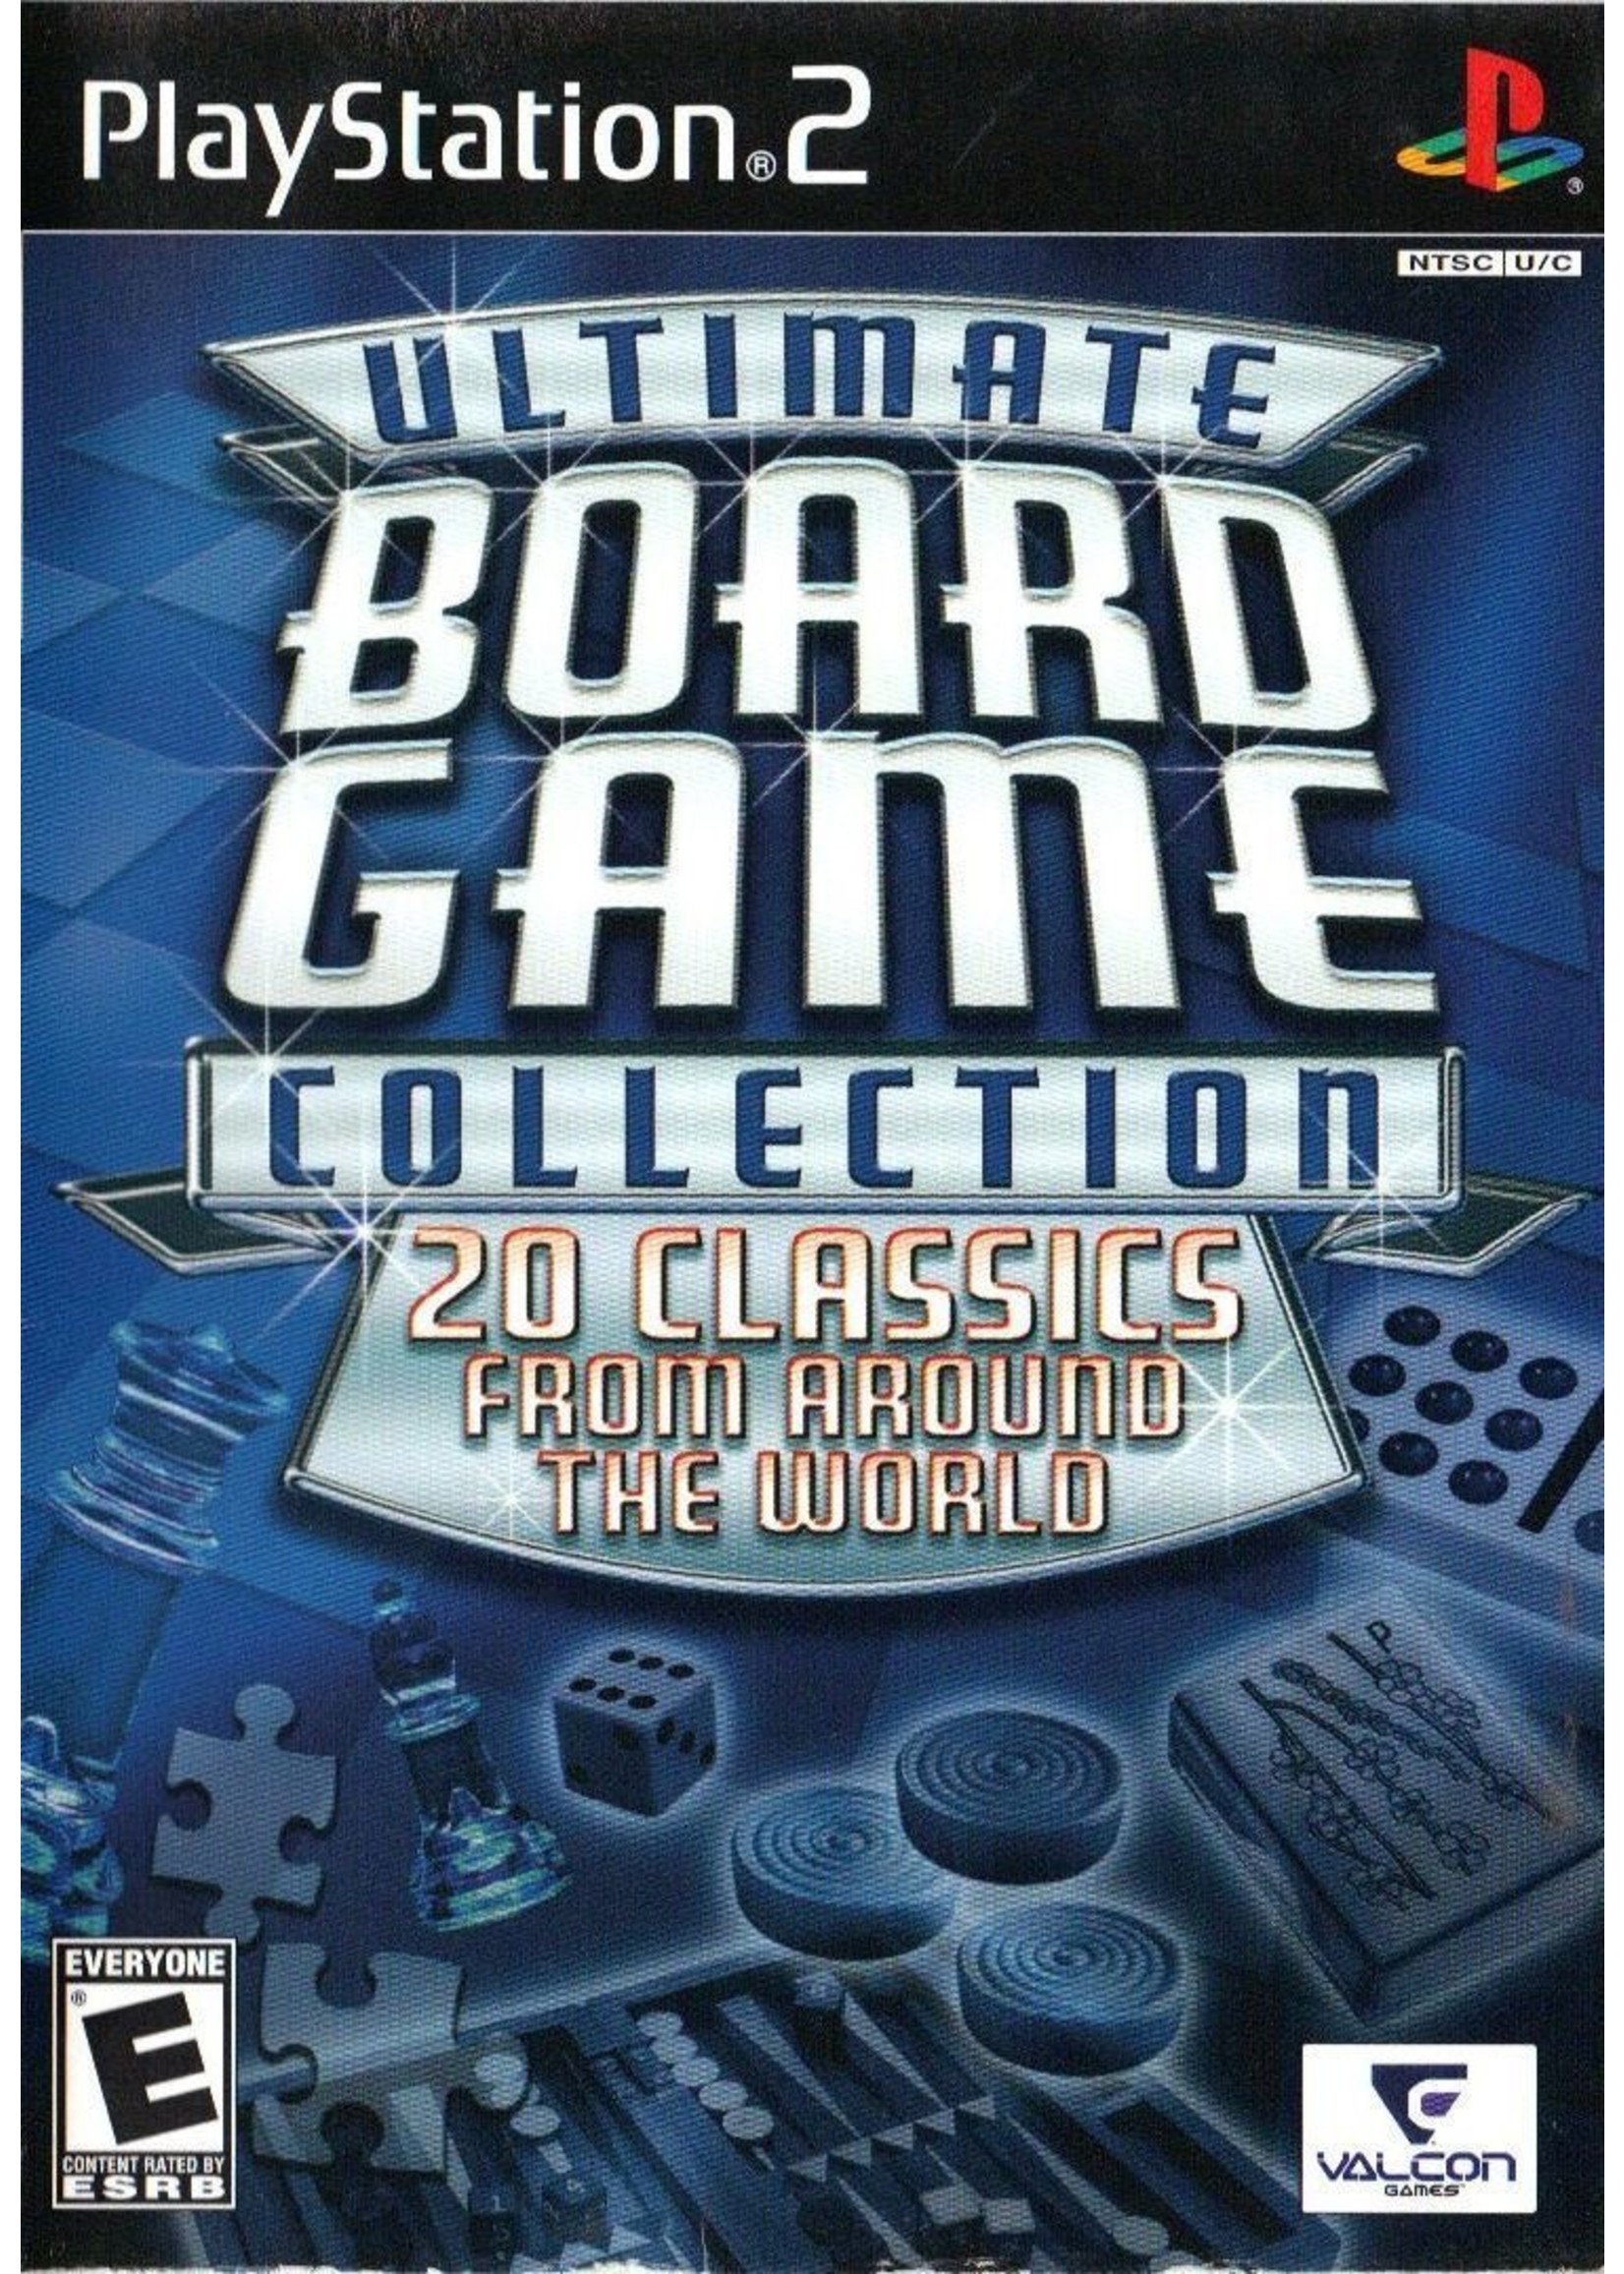 Sony Playstation 2 (PS2) Ultimate Board Game Collection